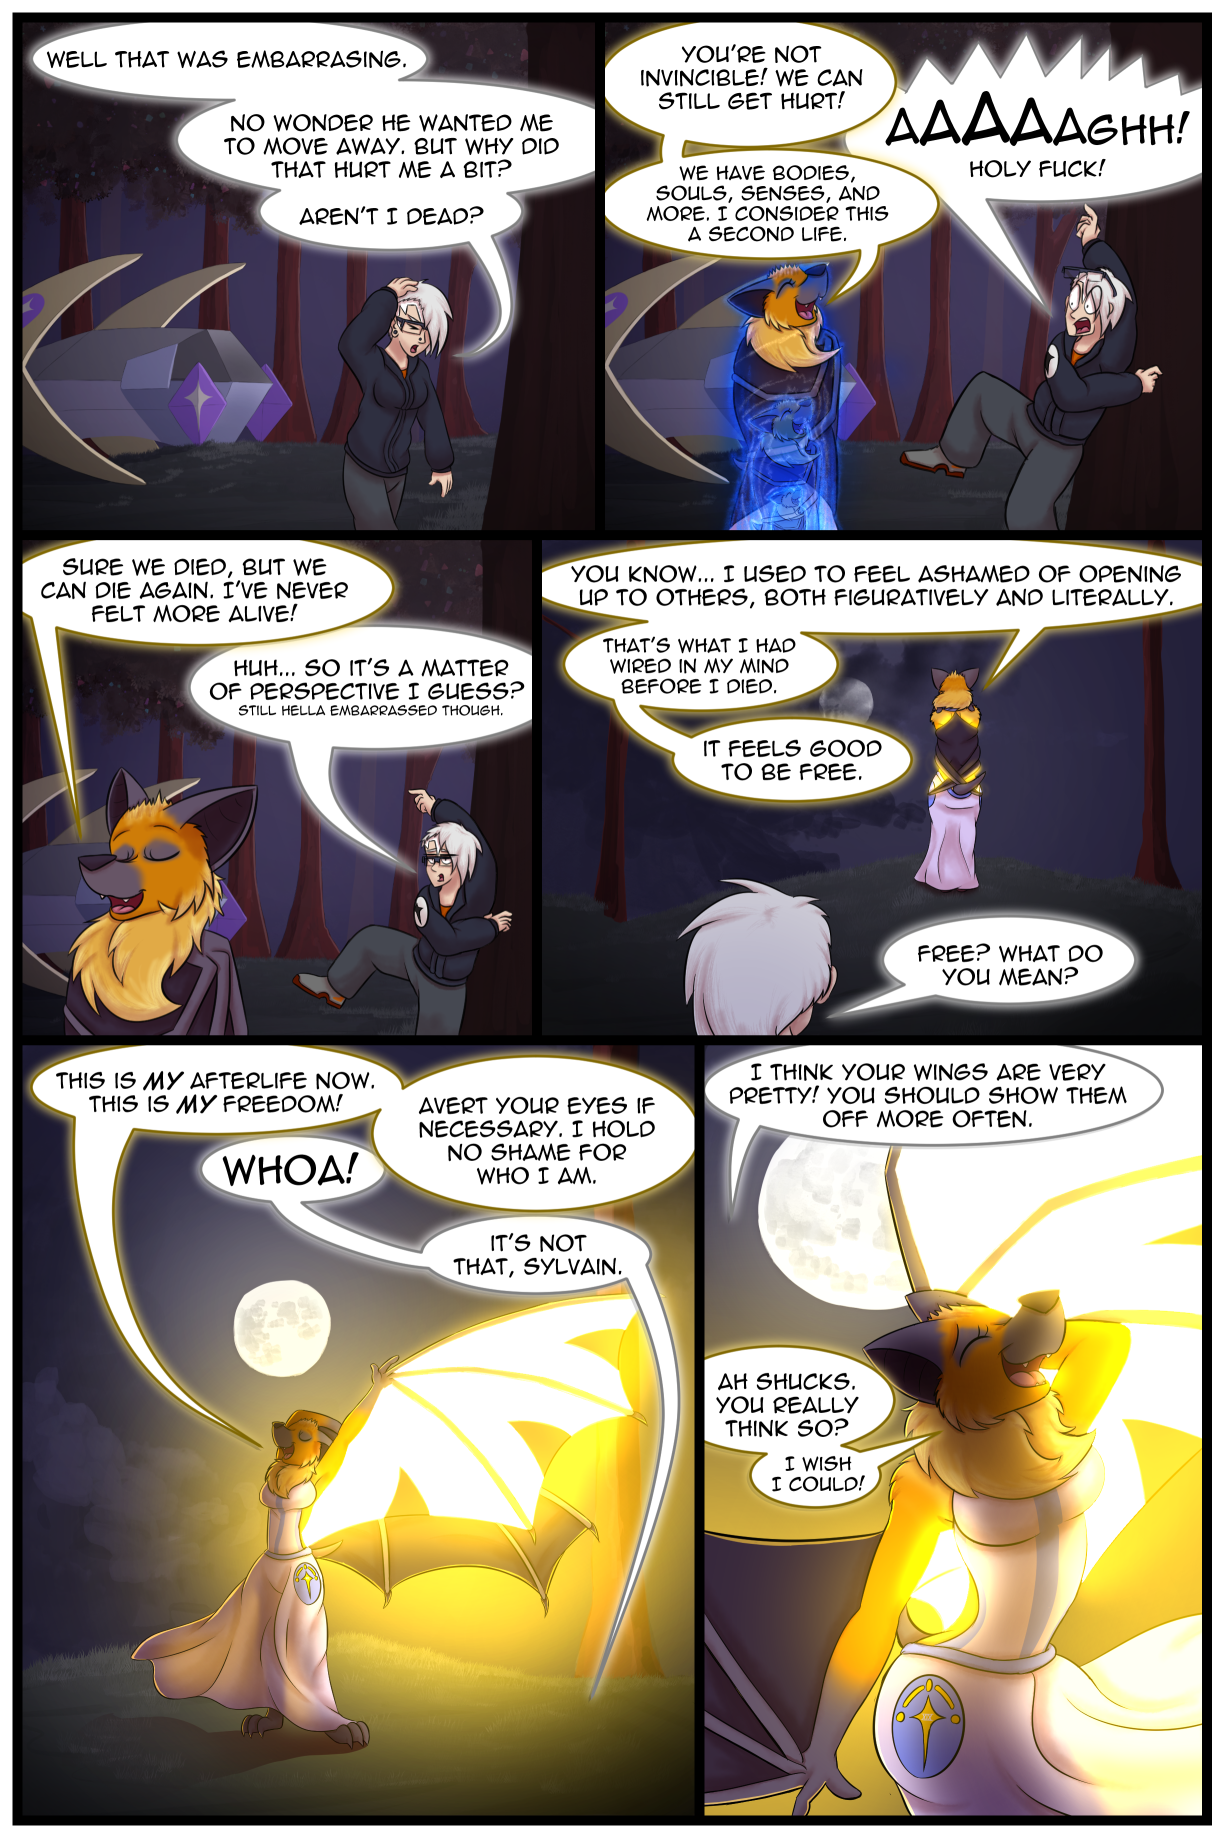 Ch5 Page 4 – Freedom